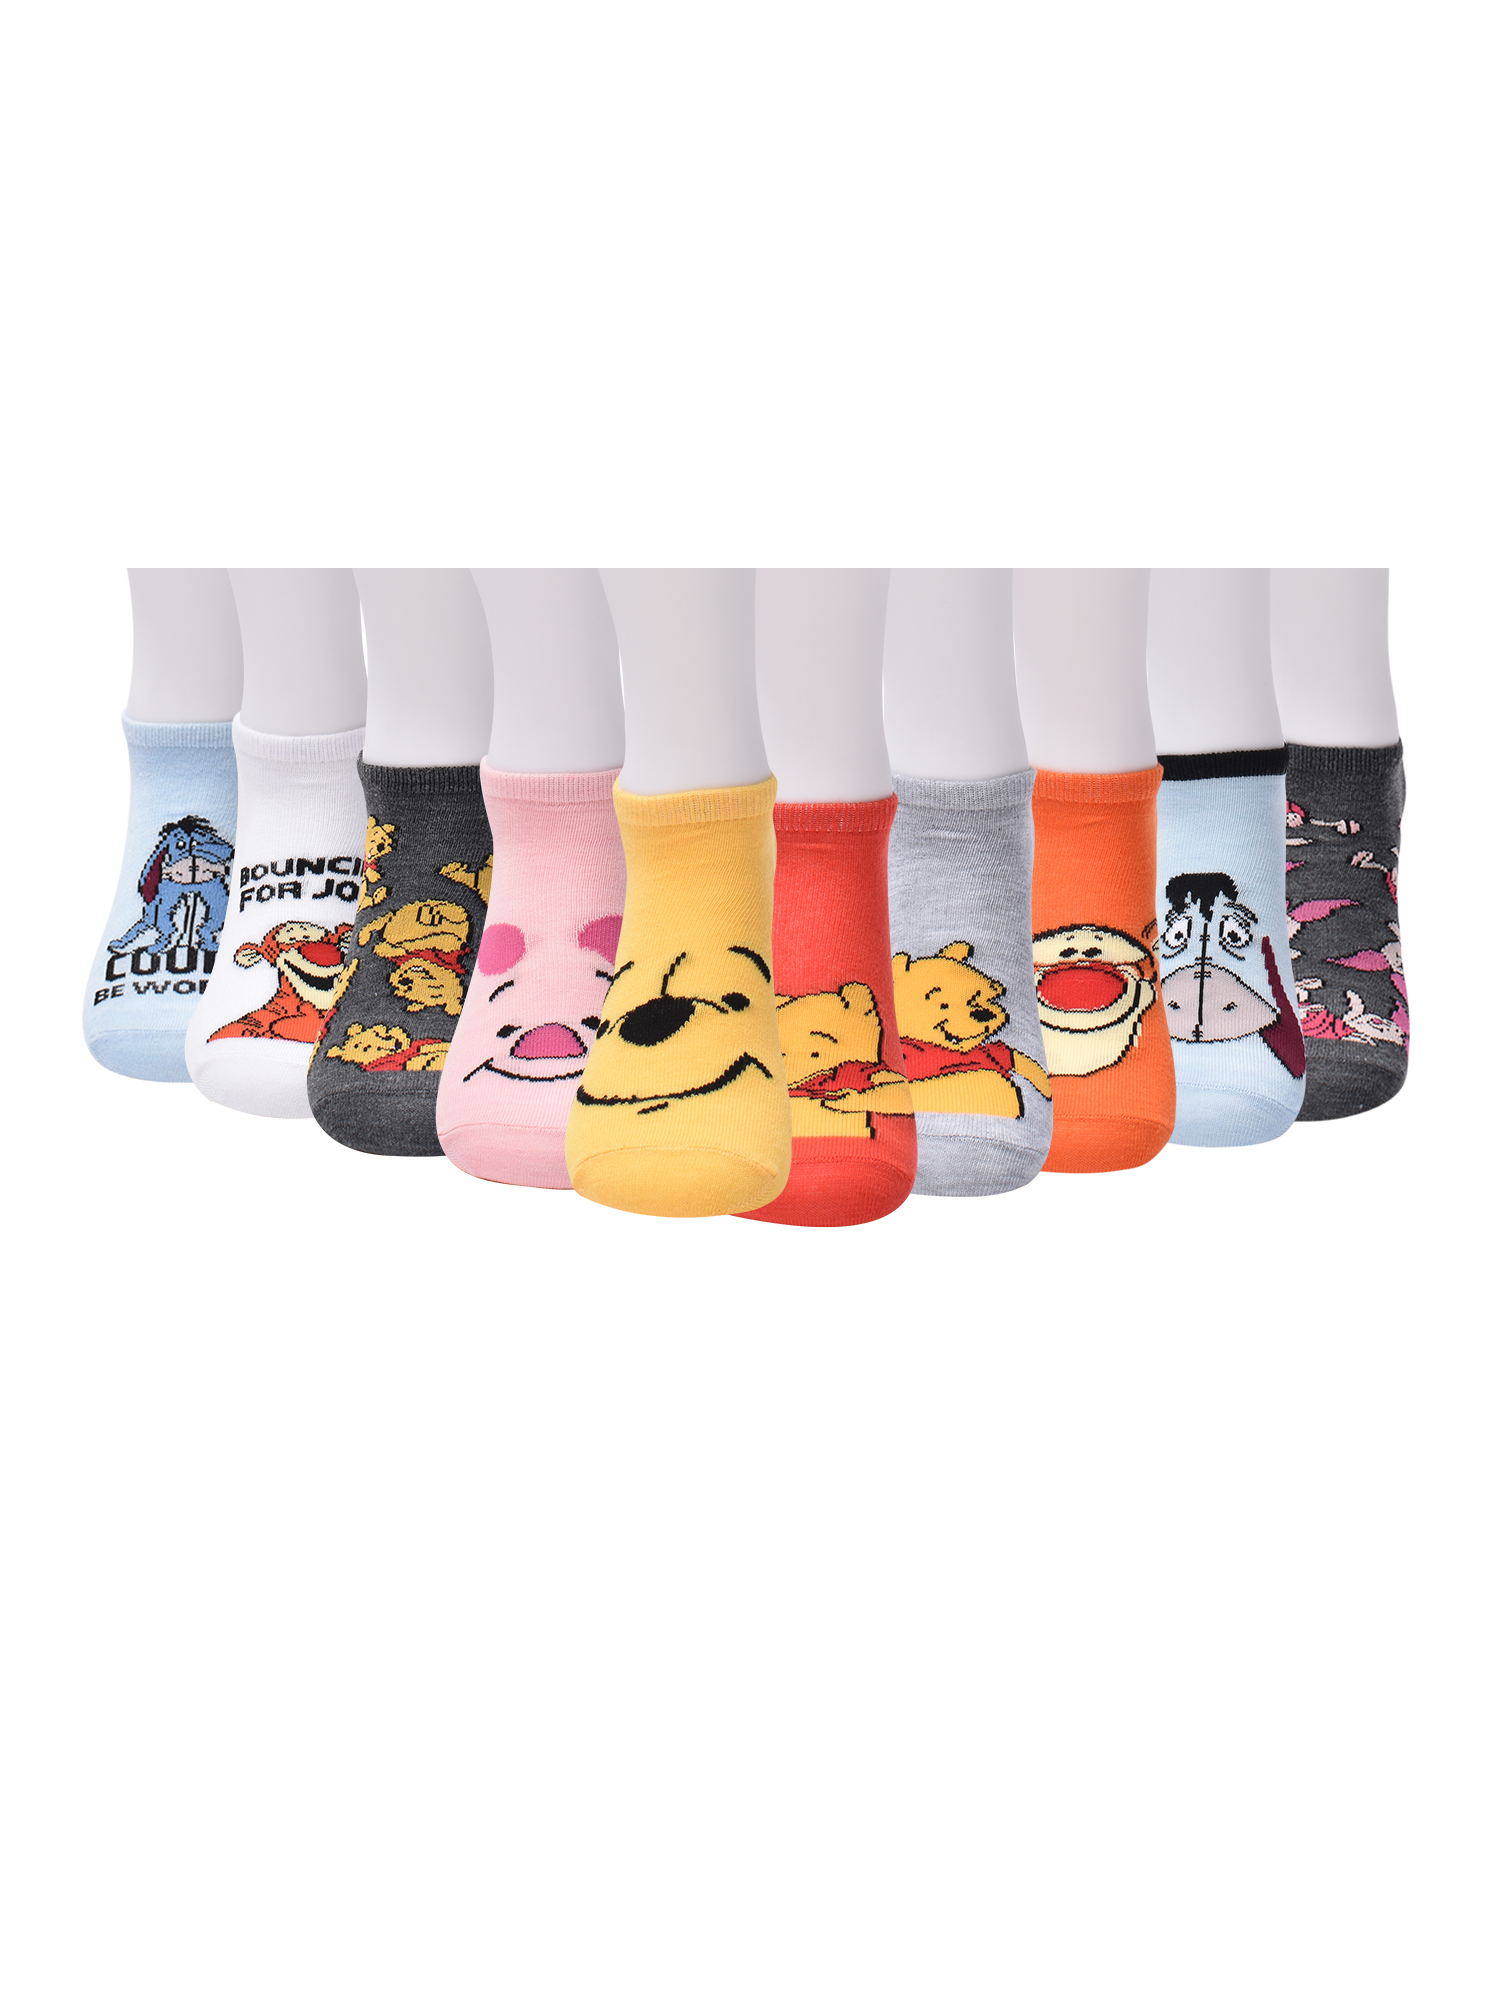 Disney Womens Winnie the Pooh Graphic Super No Show Socks, 10-Pack, Sizes 4-10 - image 4 of 5